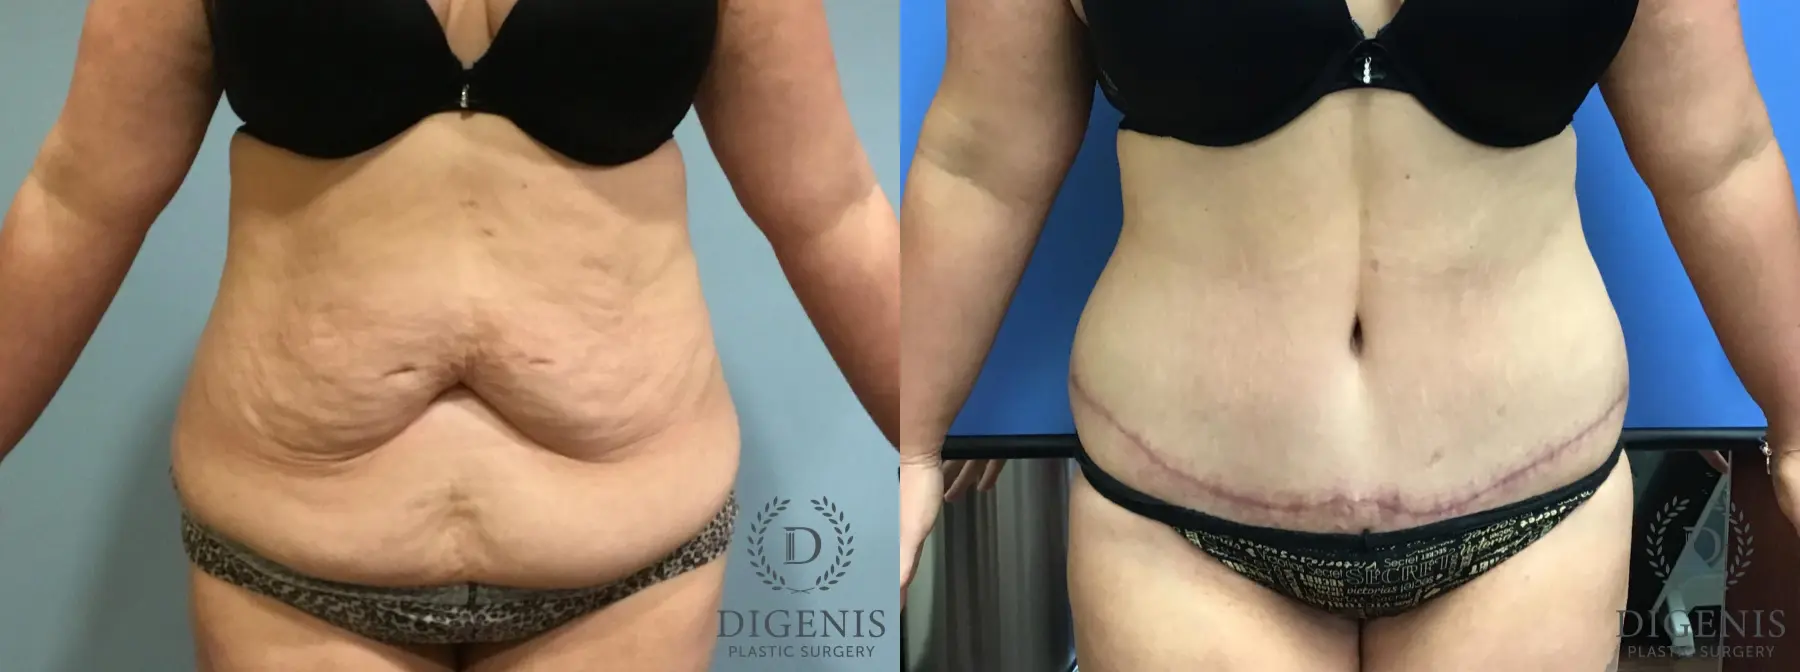 Abdominoplasty: Patient 6 - Before and After 1